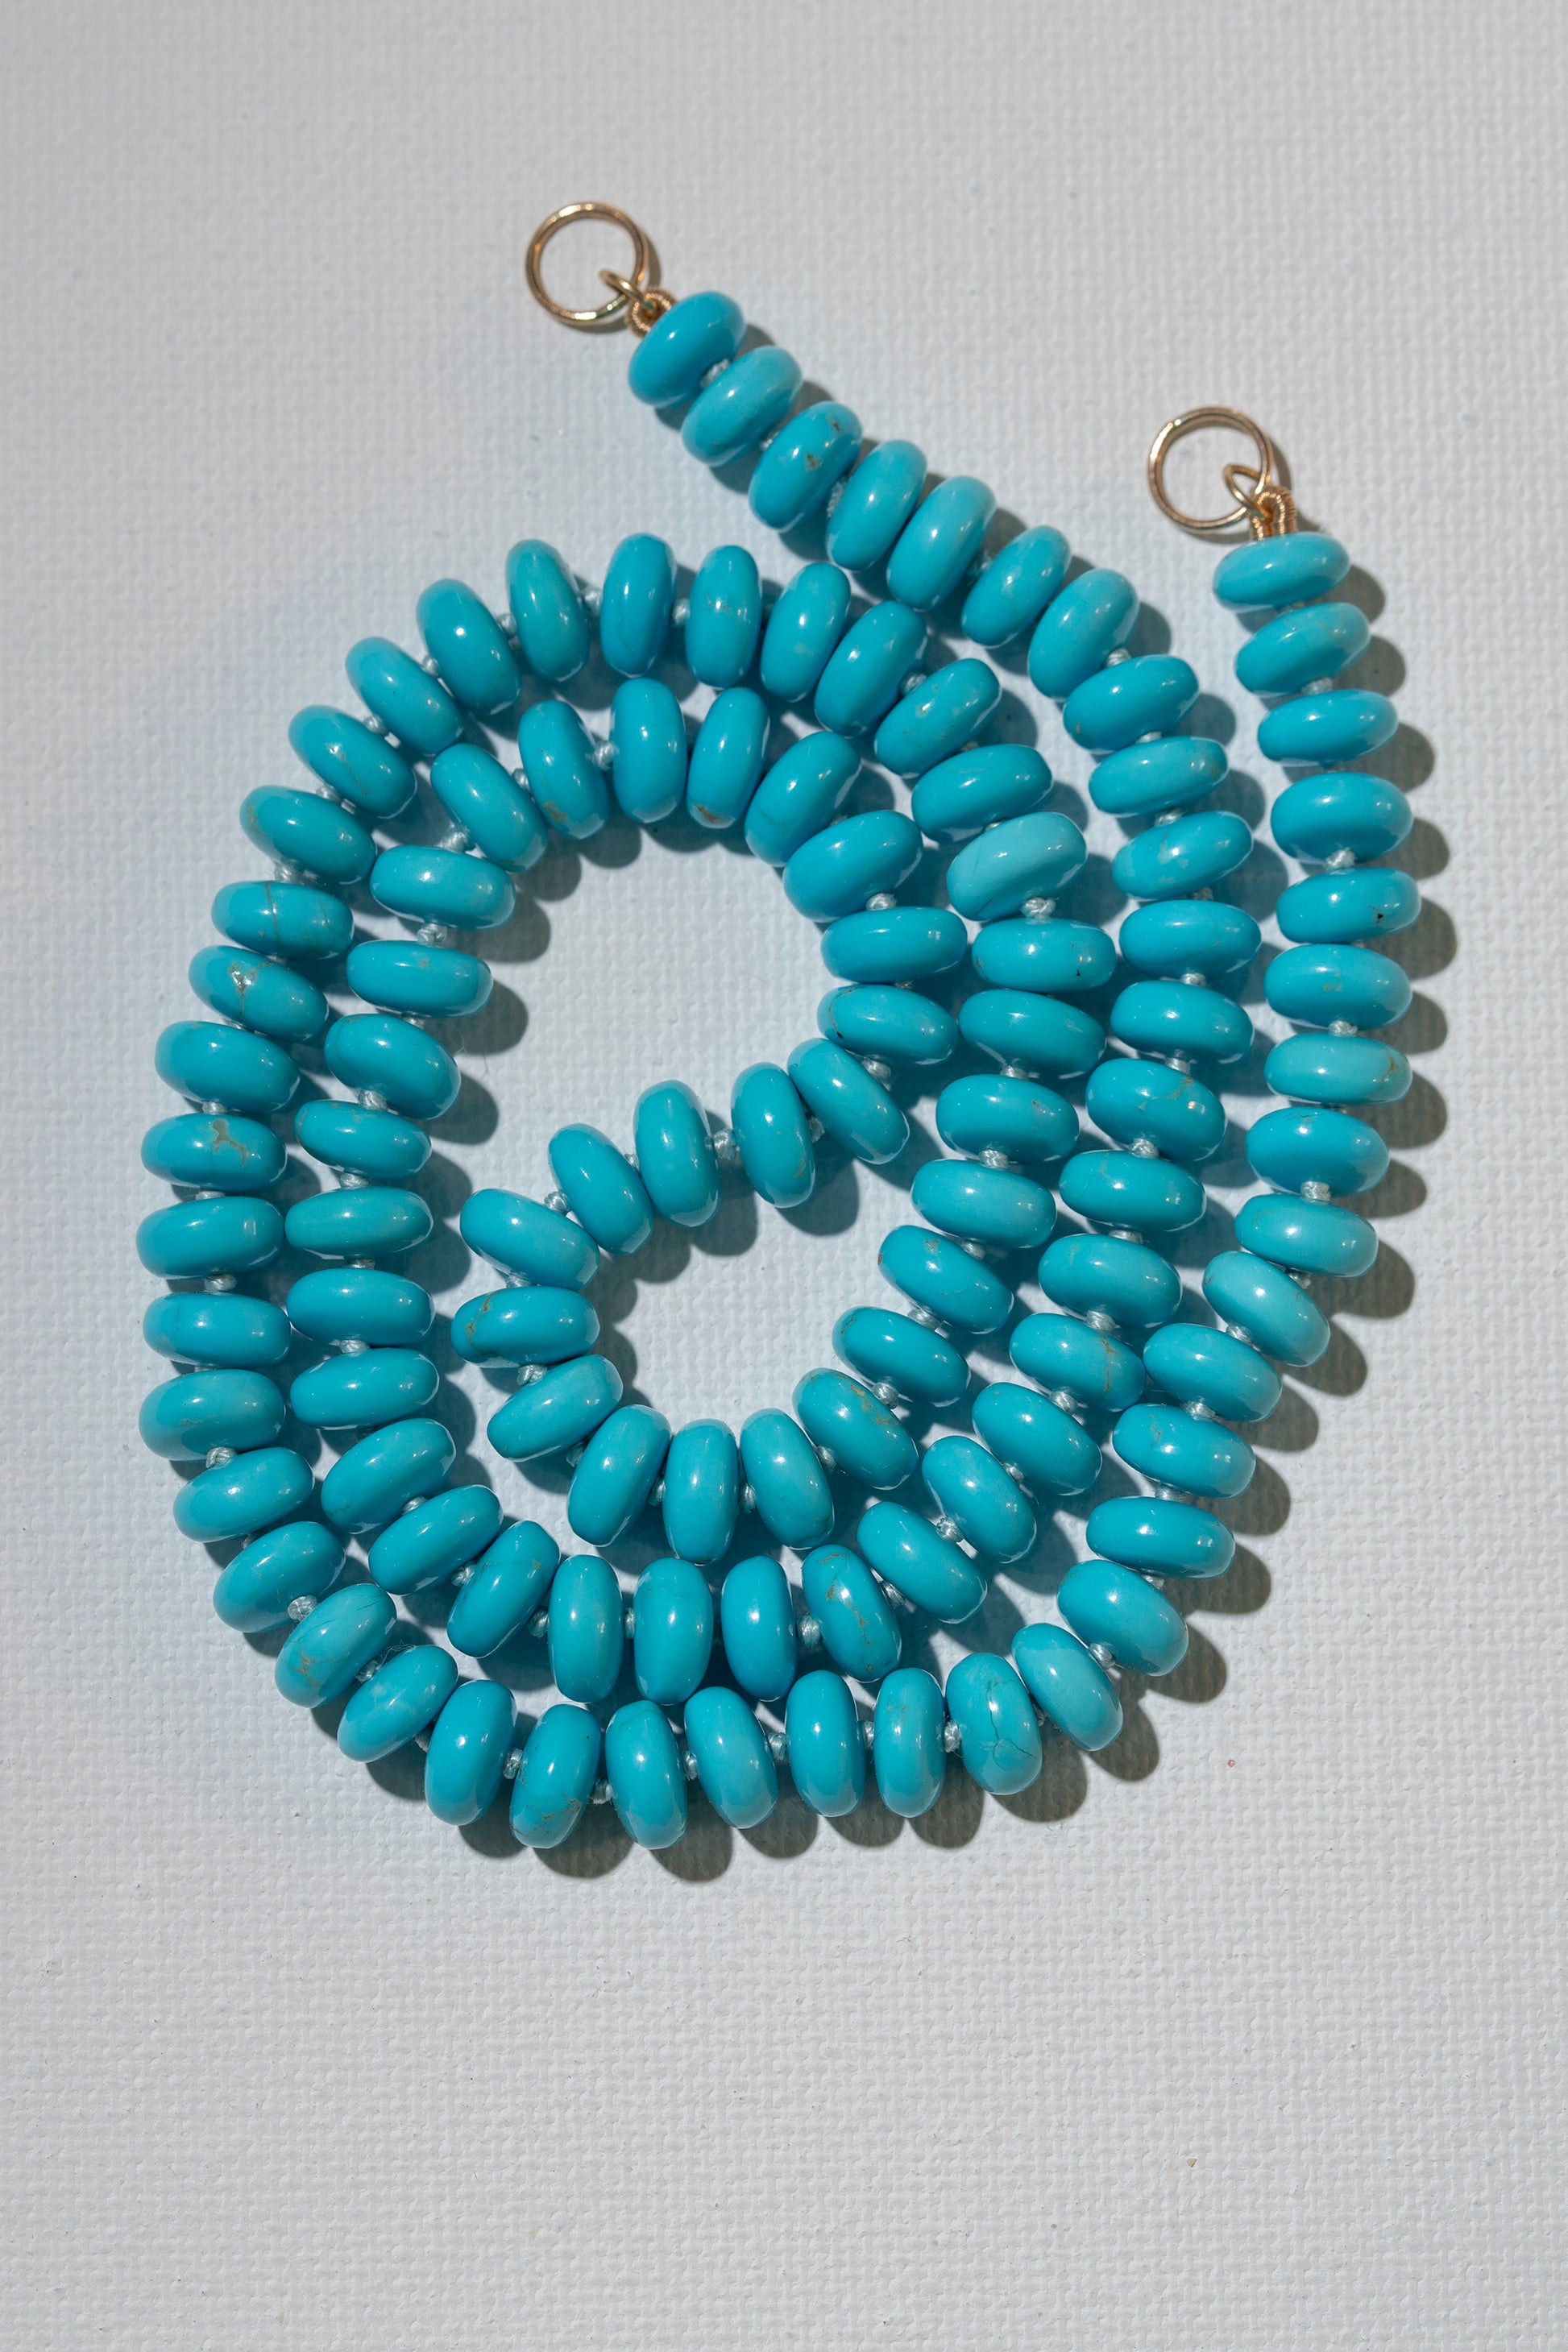 Kingman Turquoise Knotted Candy Necklace 14k Open Loopsopen loop 14k necklace for holding locks knotted candy necklace best knotted necklaces arizona turquoise authentic